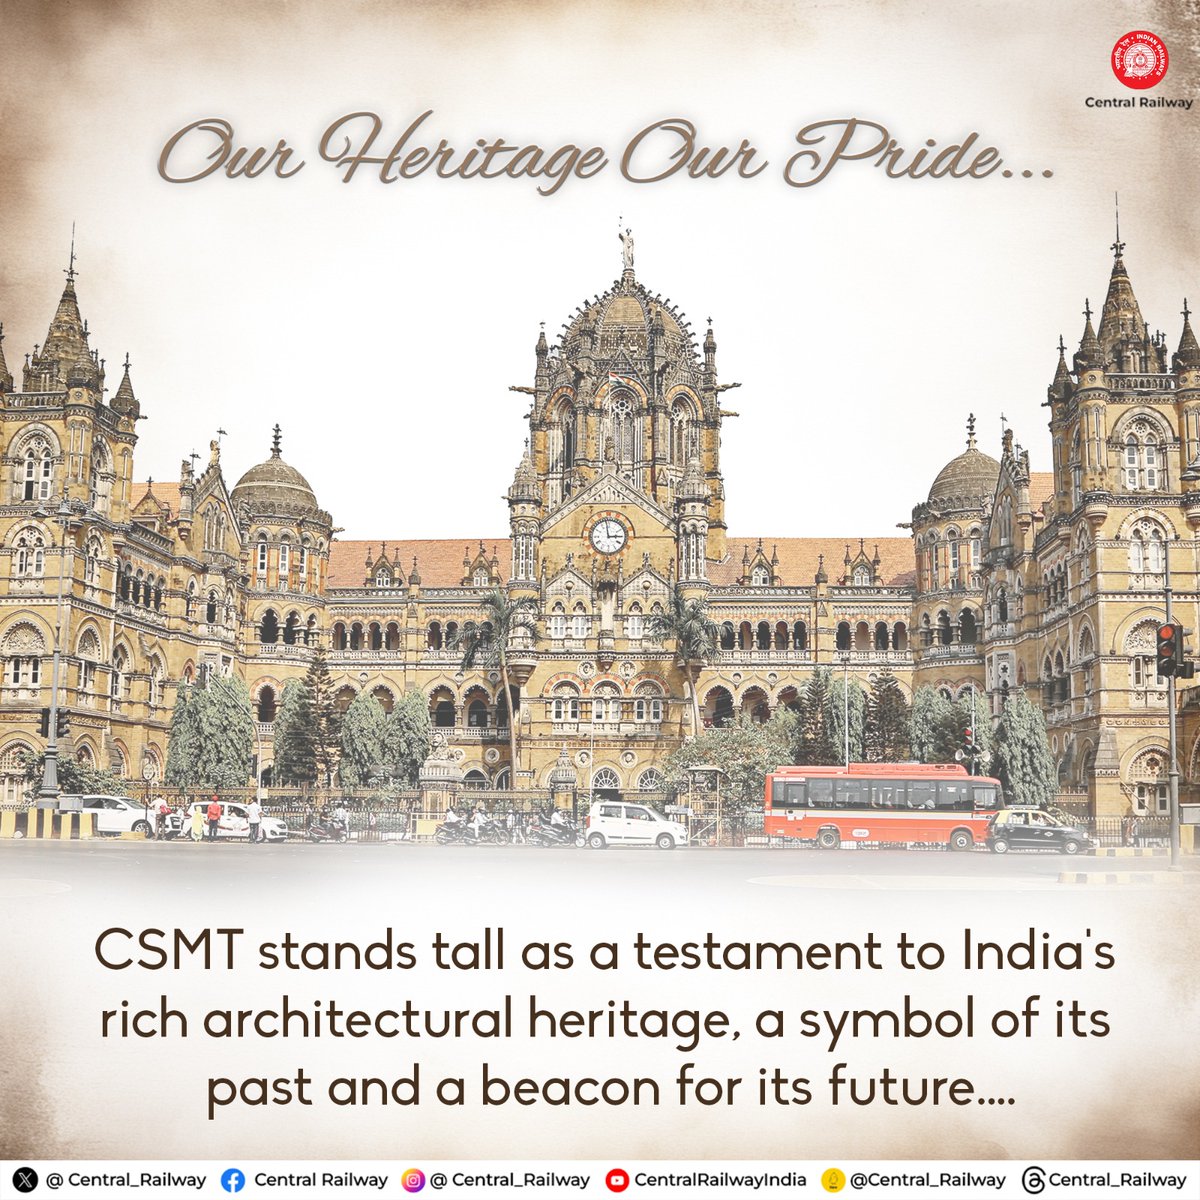 Happy #WorldHeritageDay! Celebrating our rich architectural heritage and the UNESCO World Heritage site, Chhatrapati Shivaji Maharaj Terminus, a symbol of our glorious past. Our heritage, our pride! @RailMinIndia